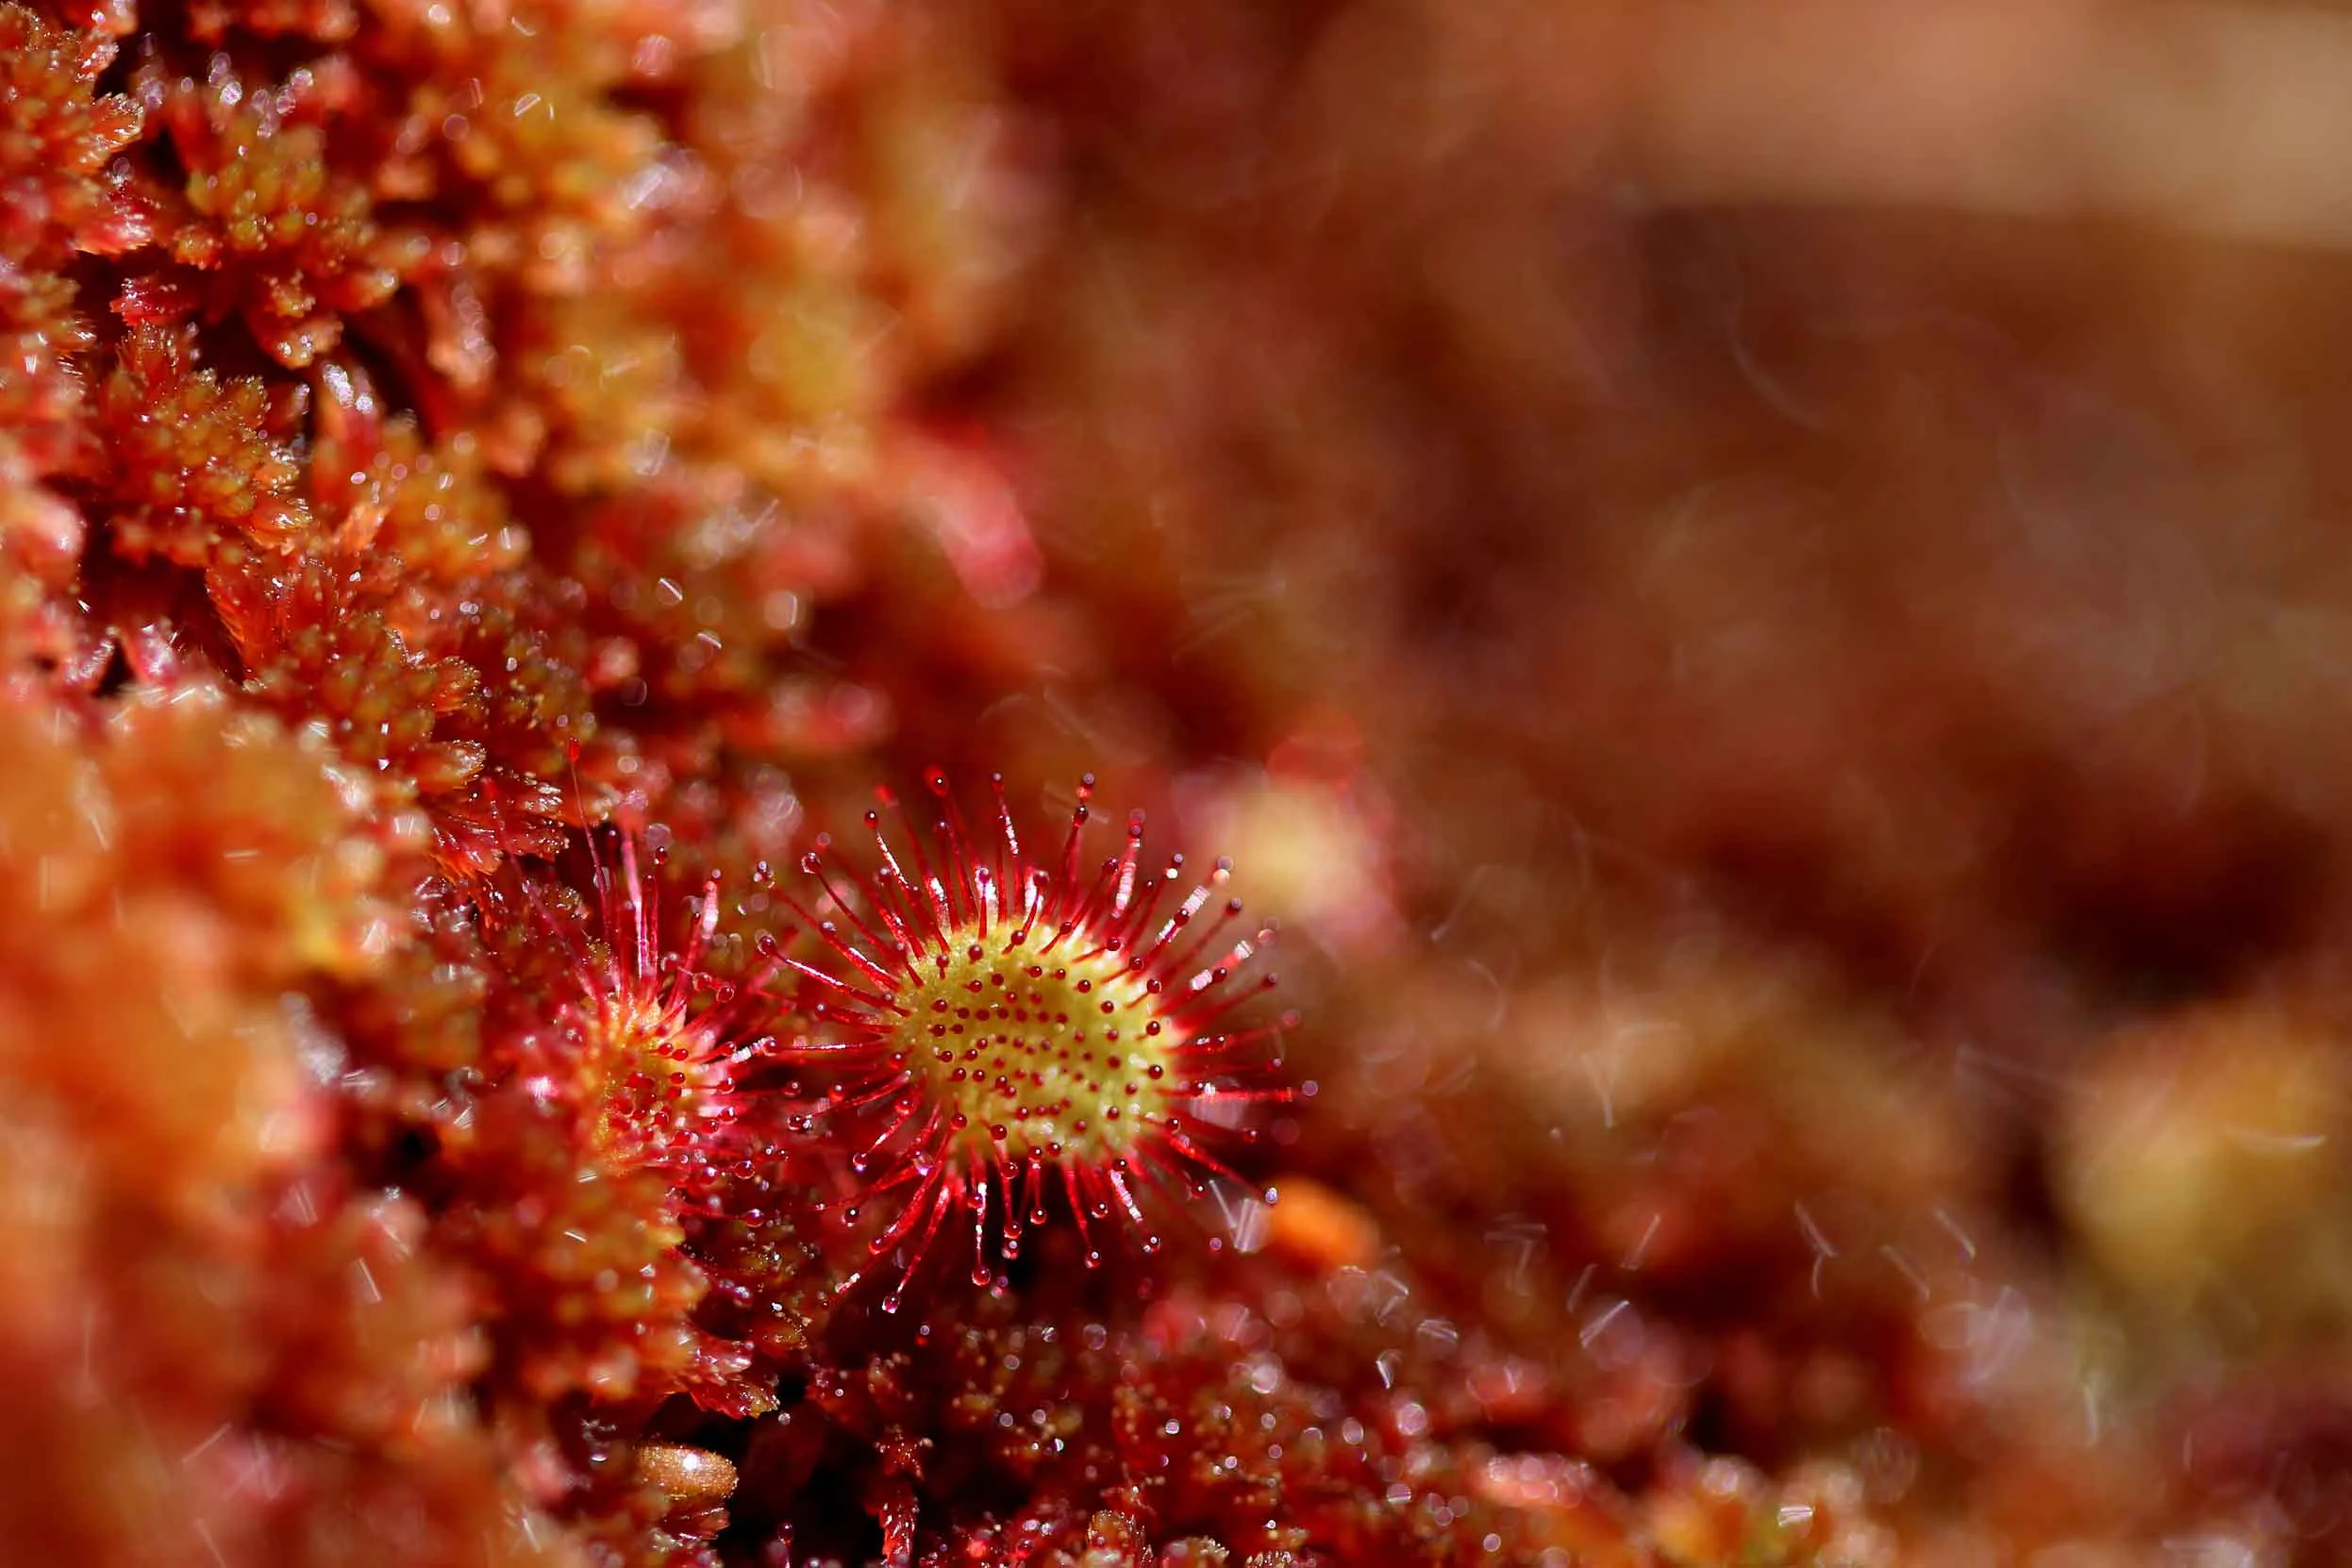 A patch of pinkish-red moss with two Common Sundew flowers also growing.